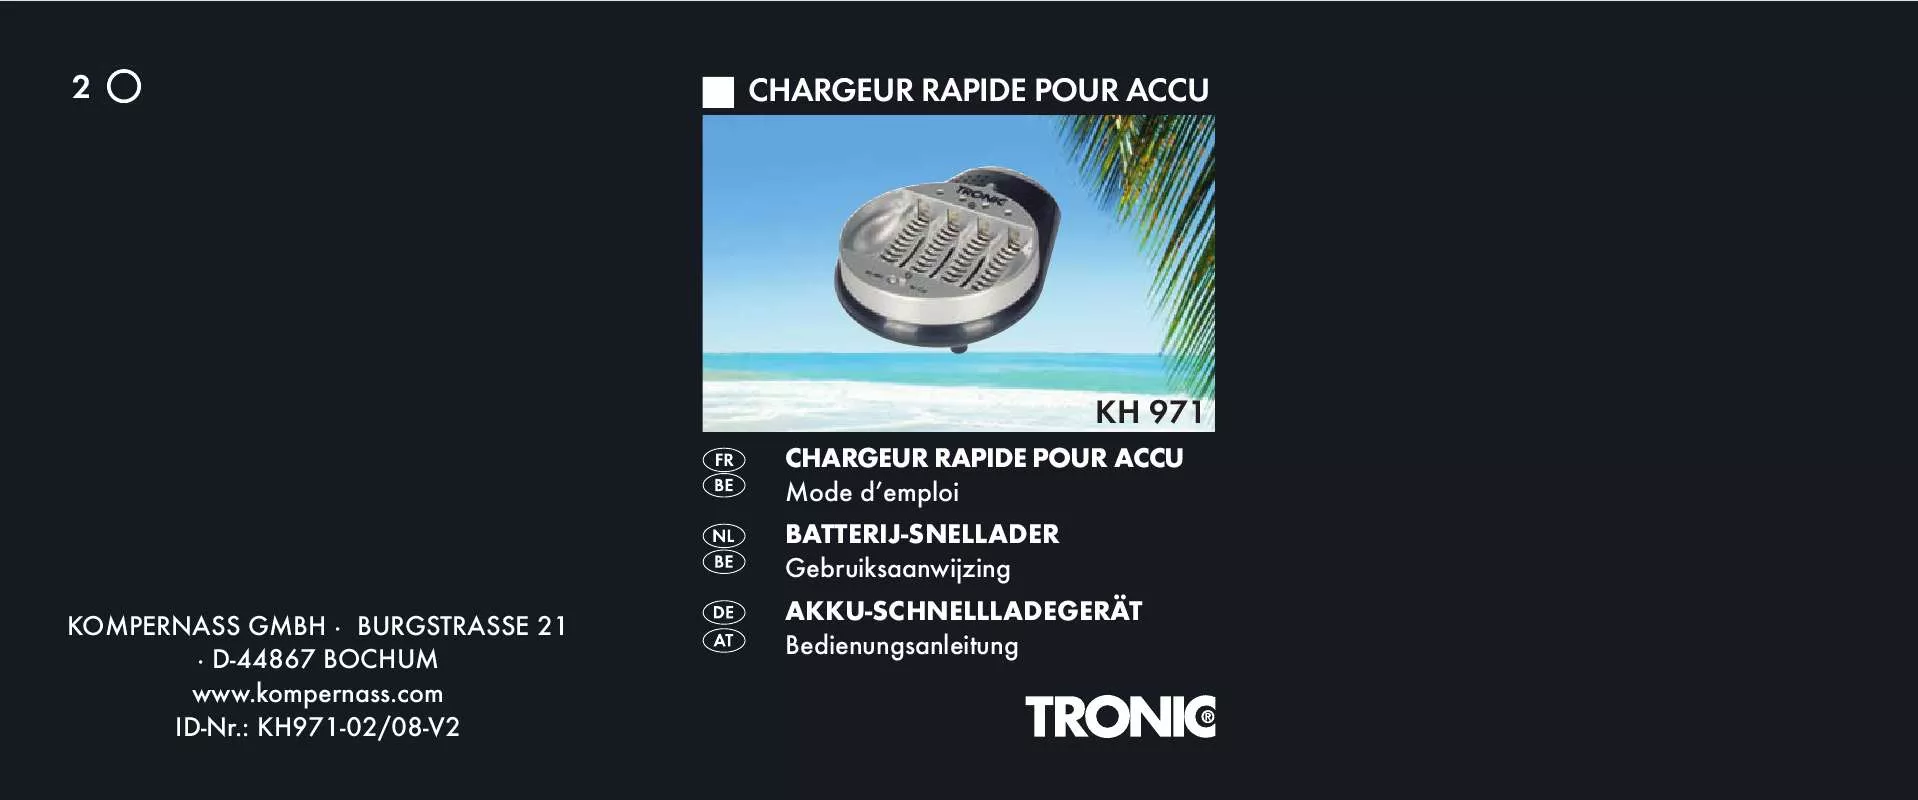 Mode d'emploi TRONIC KH 971 RAPID BATTERY CHARGER